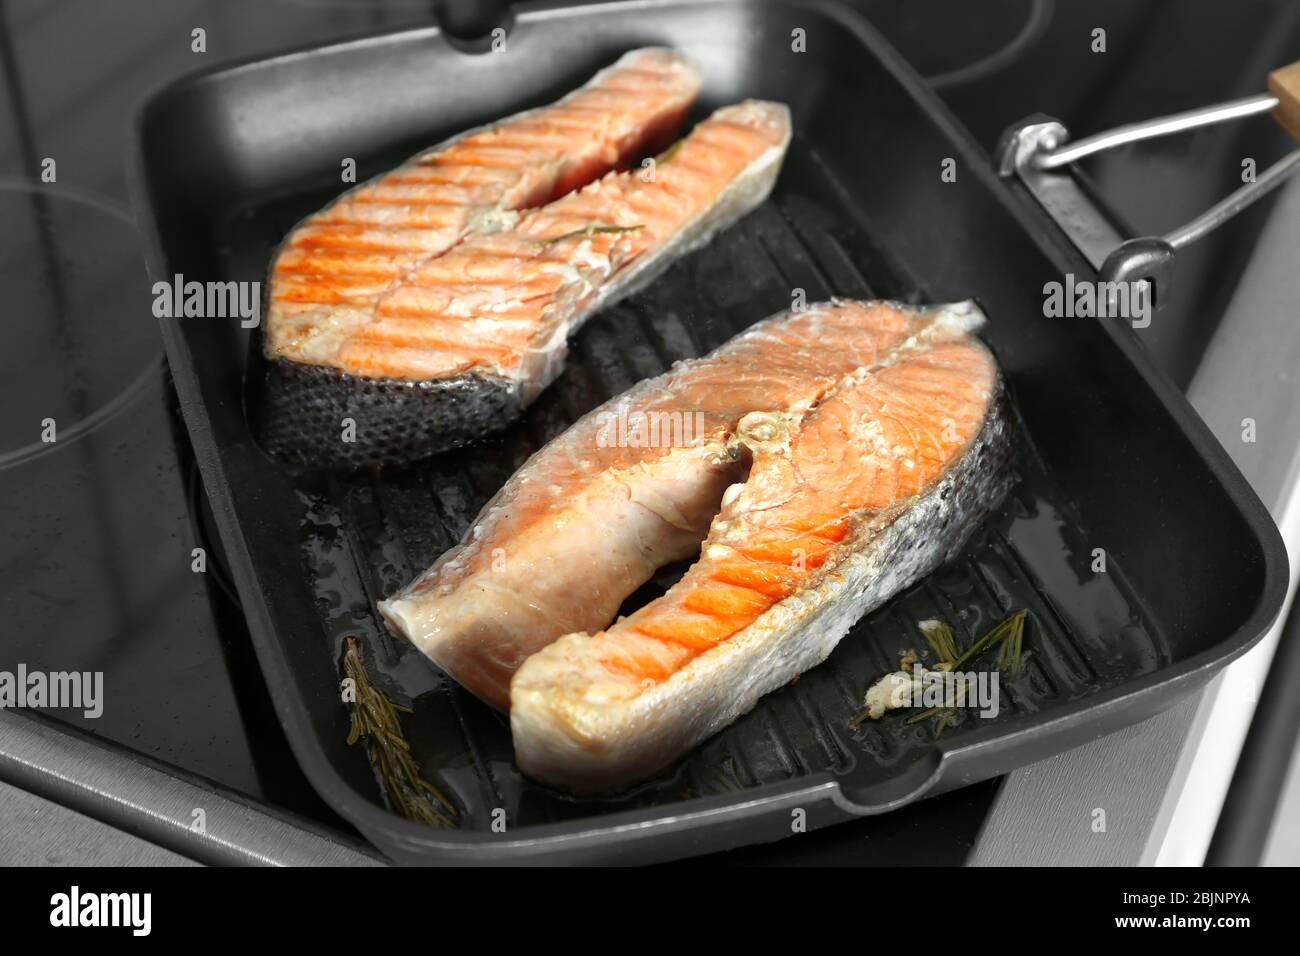 Grill pan with delicious salmon steaks on stove in kitchen Stock